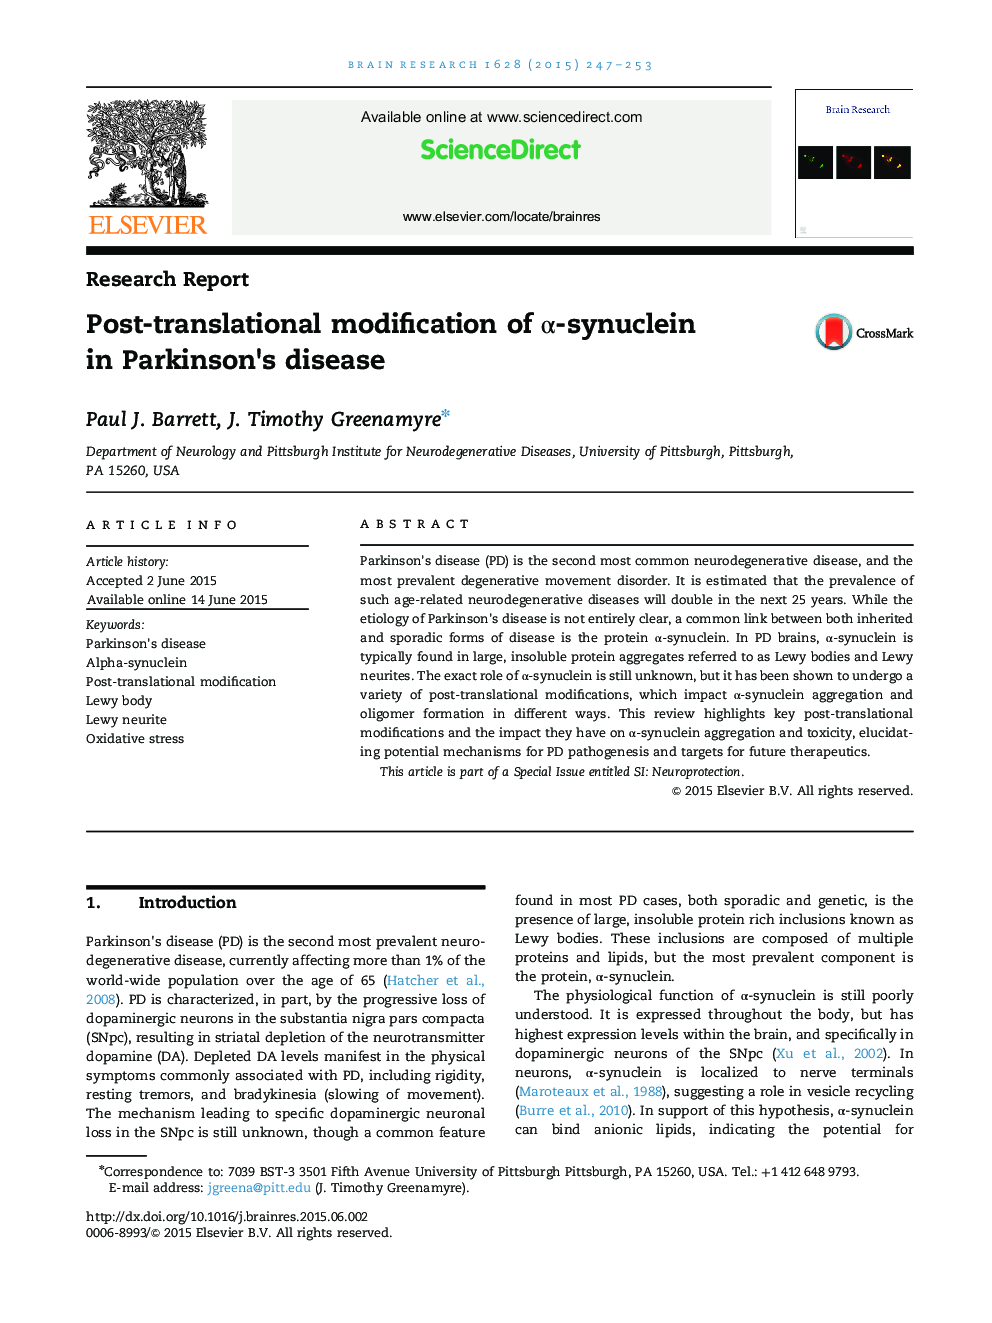 Research ReportPost-translational modification of Î±-synuclein in Parkinson×³s disease